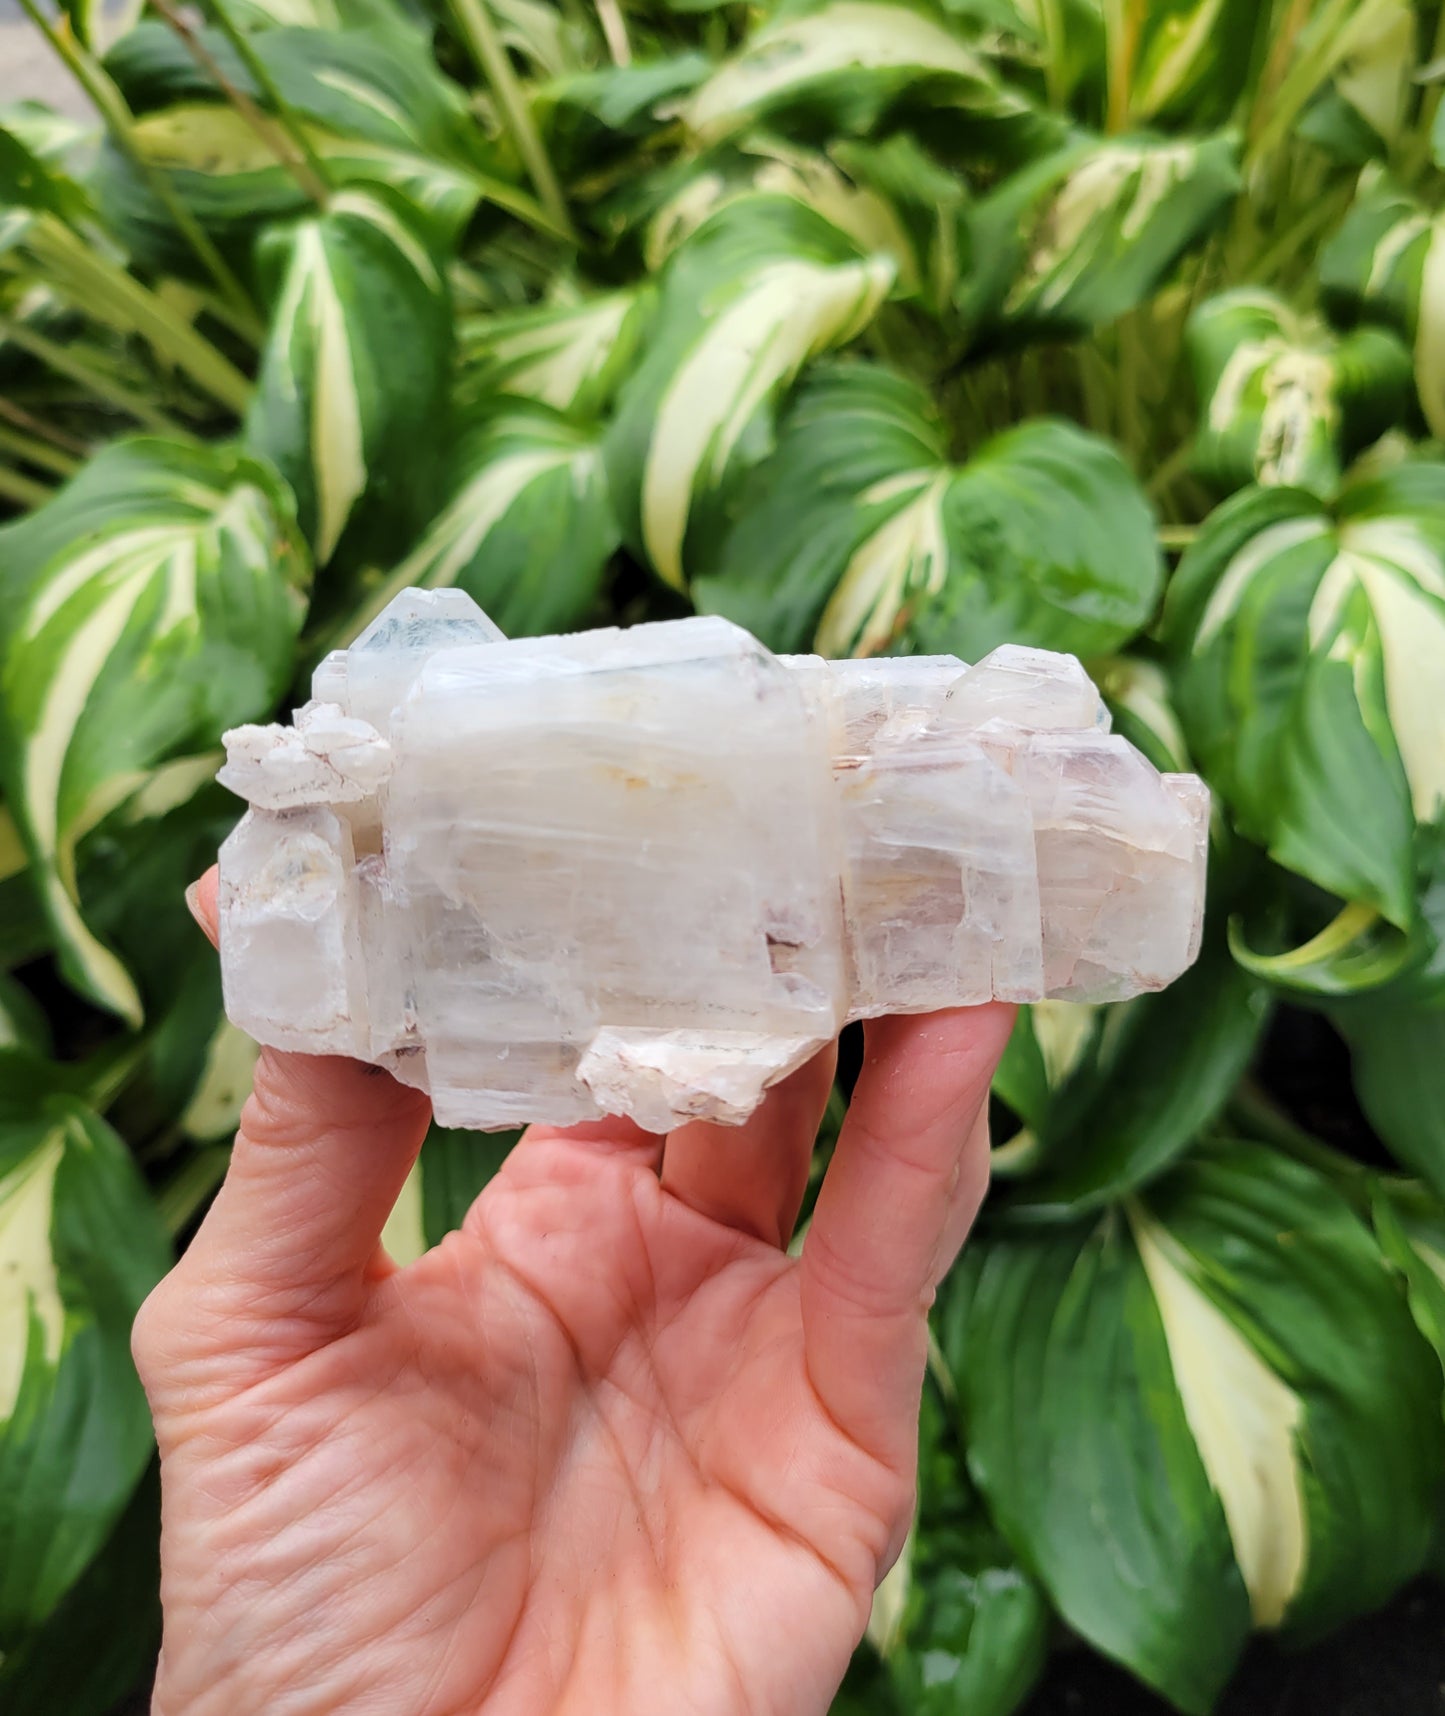 Quartz with Lithium, Faden Growth Habit from Colombia